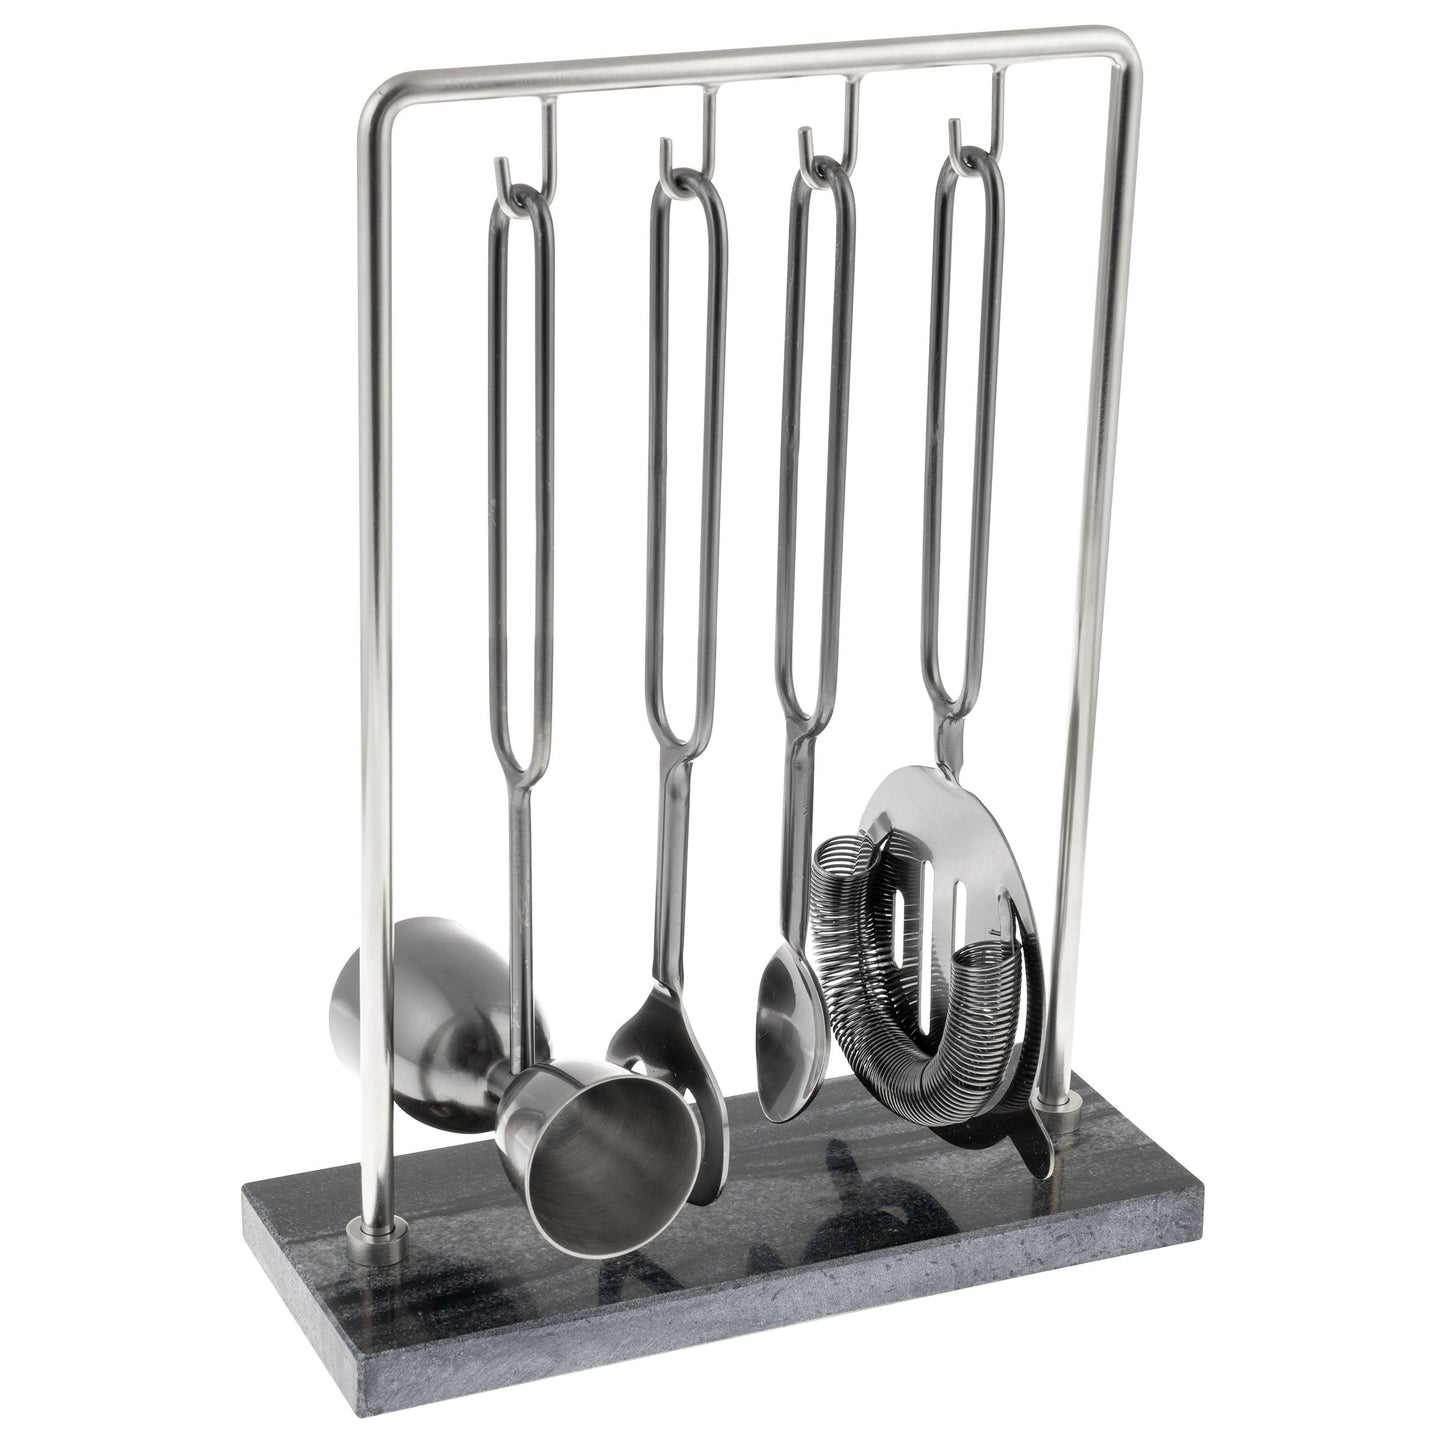 stainless stell bar tools hanging on a frame with a grey marble base.